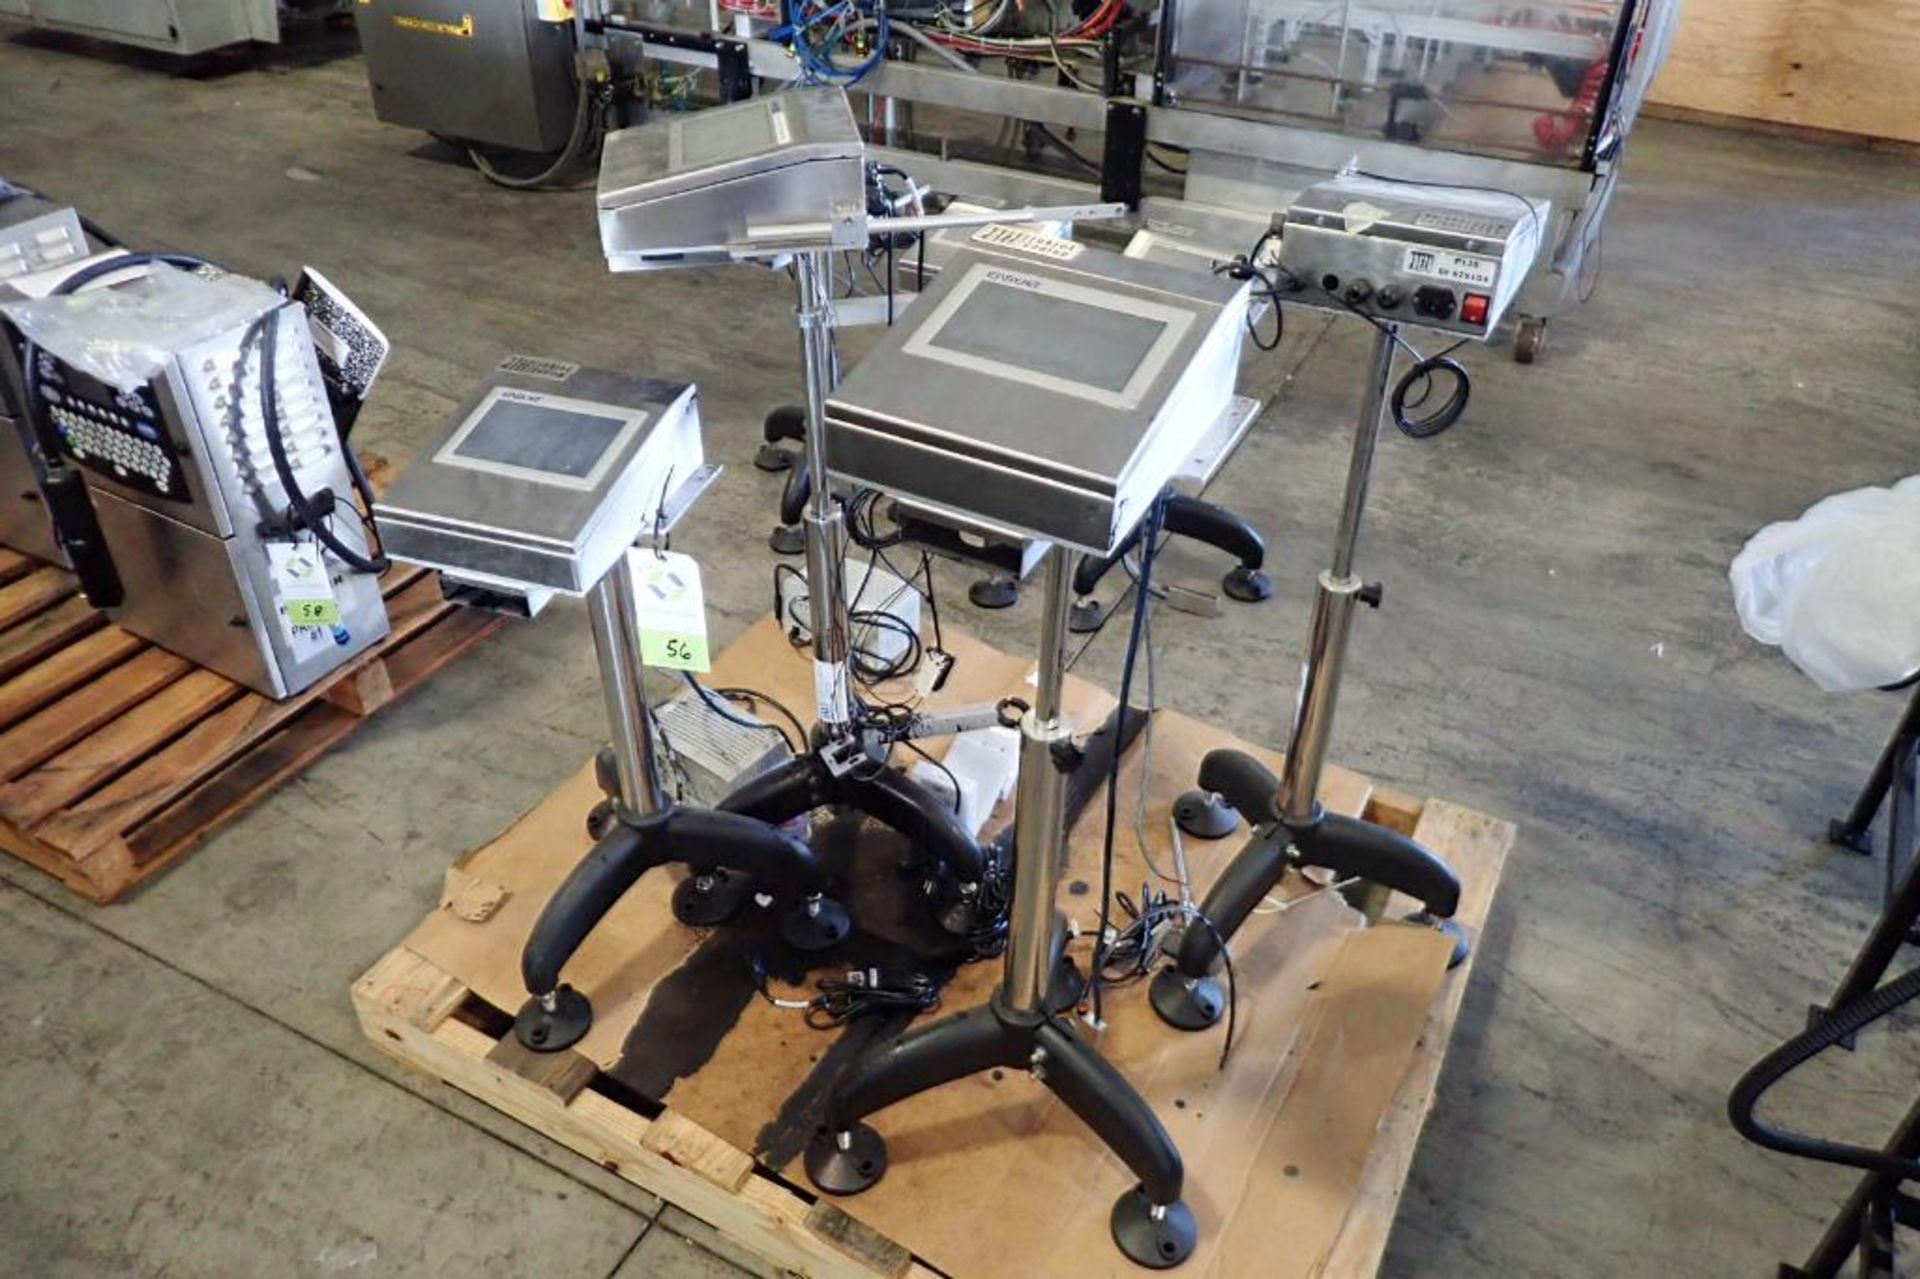 Preza easyjet ink jet coder, Model P128, touch screen, only 2 have ink heads, adjustable stands {